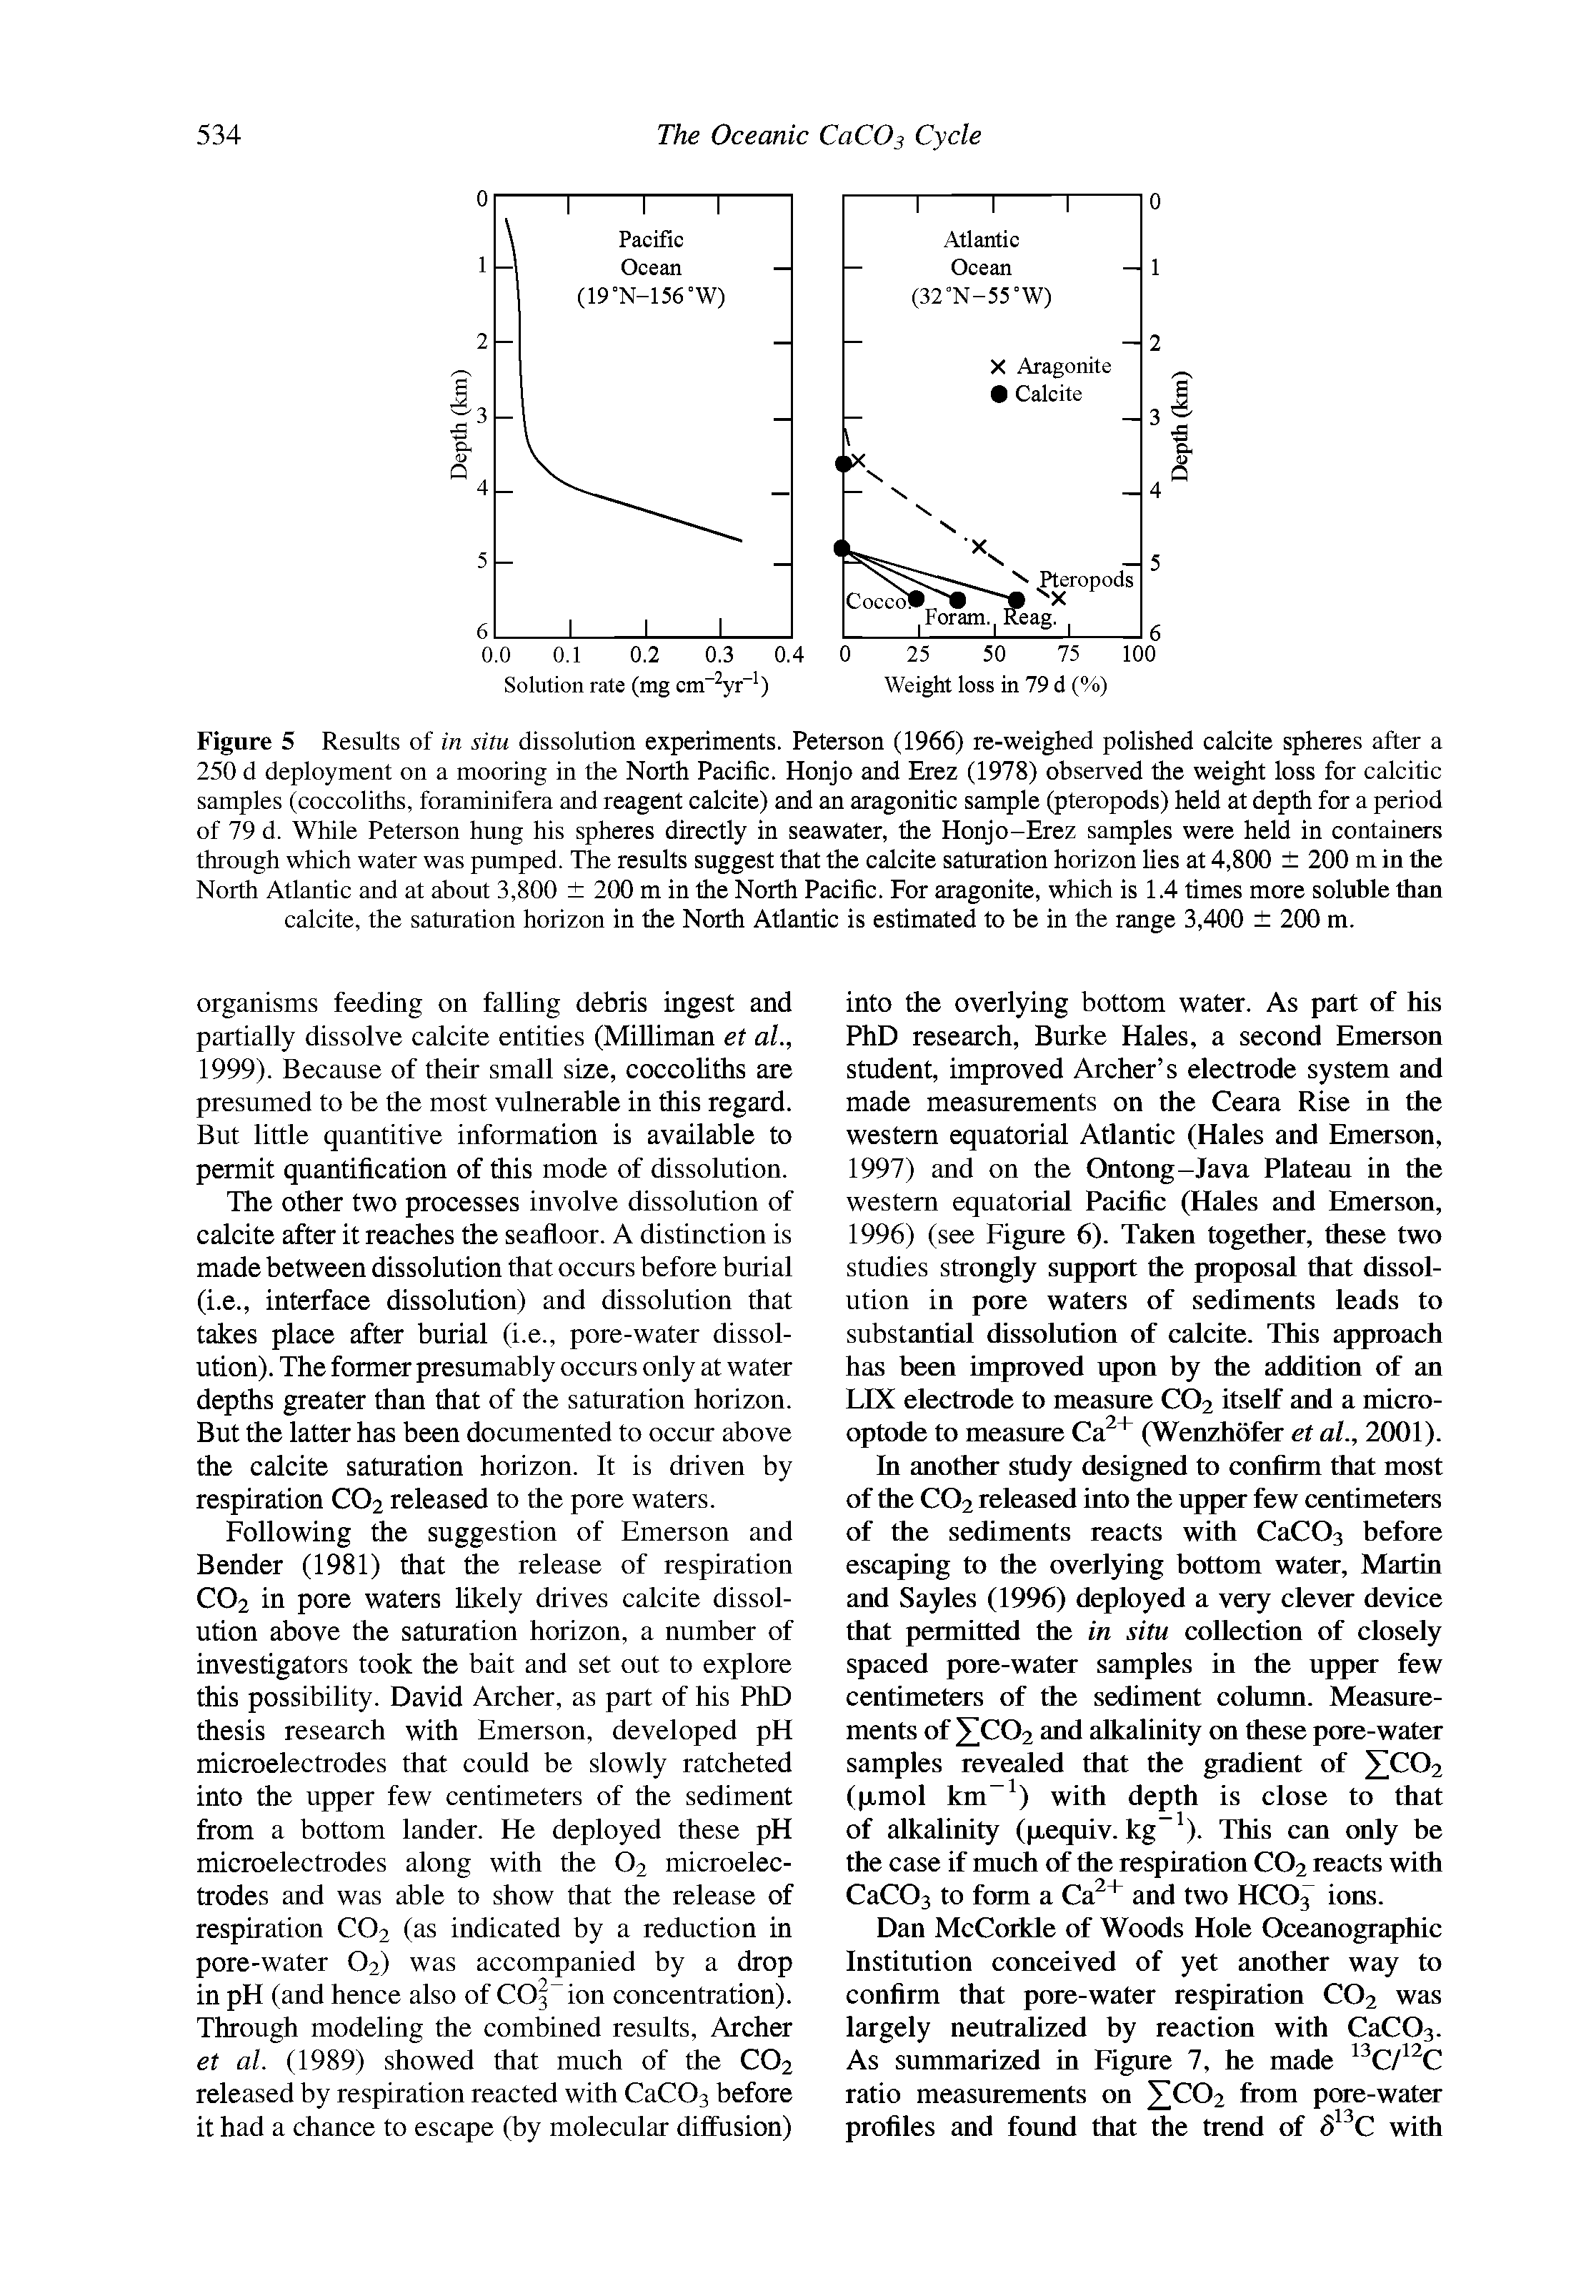 Figure 5 Results of in situ dissolution experiments. Peterson (1966) re-weighed polished calcite spheres after a 250 d deployment on a mooring in the North Pacific. Honjo and Erez (1978) observed the weight loss for calcitic samples (coccoliths, foraminifera and reagent calcite) and an aragonitic sample (pteropods) held at depth for a period of 79 d. While Peterson hung his spheres directly in seawater, the Honjo-Erez samples were held in containers through which water was pumped. The results suggest that the calcite saturation horizon lies at 4,800 200 m in the North Atlantic and at about 3,800 200 m in the North Pacific. For aragonite, which is 1.4 times more soluble than calcite, the saturation horizon in the North Atlantic is estimated to be in the range 3,400 200 m.